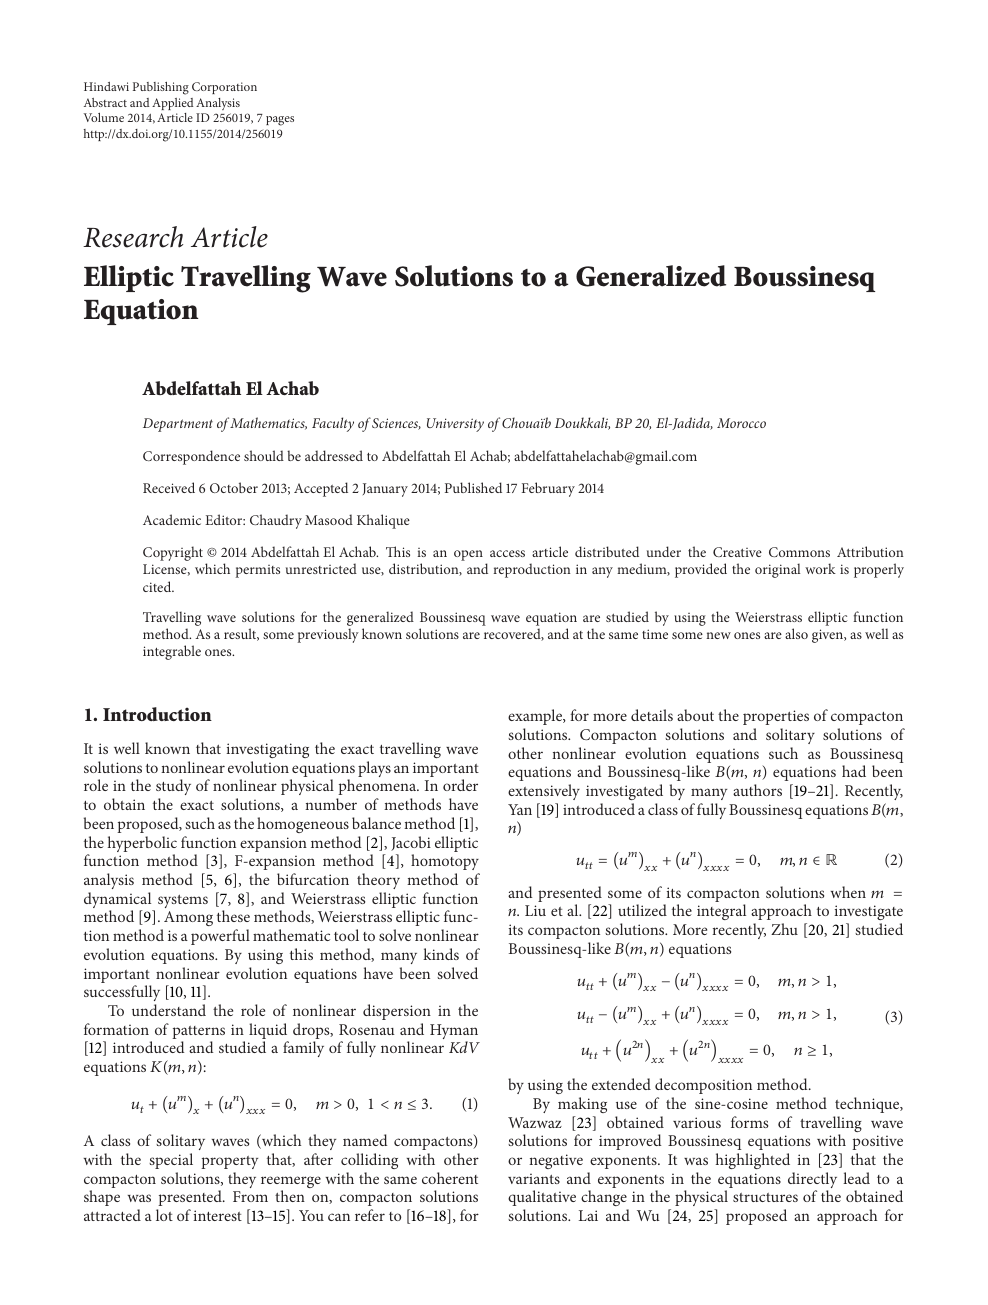 Elliptic Travelling Wave Solutions To A Generalized Boussinesq Equation Topic Of Research Paper In Mathematics Download Scholarly Article Pdf And Read For Free On Cyberleninka Open Science Hub